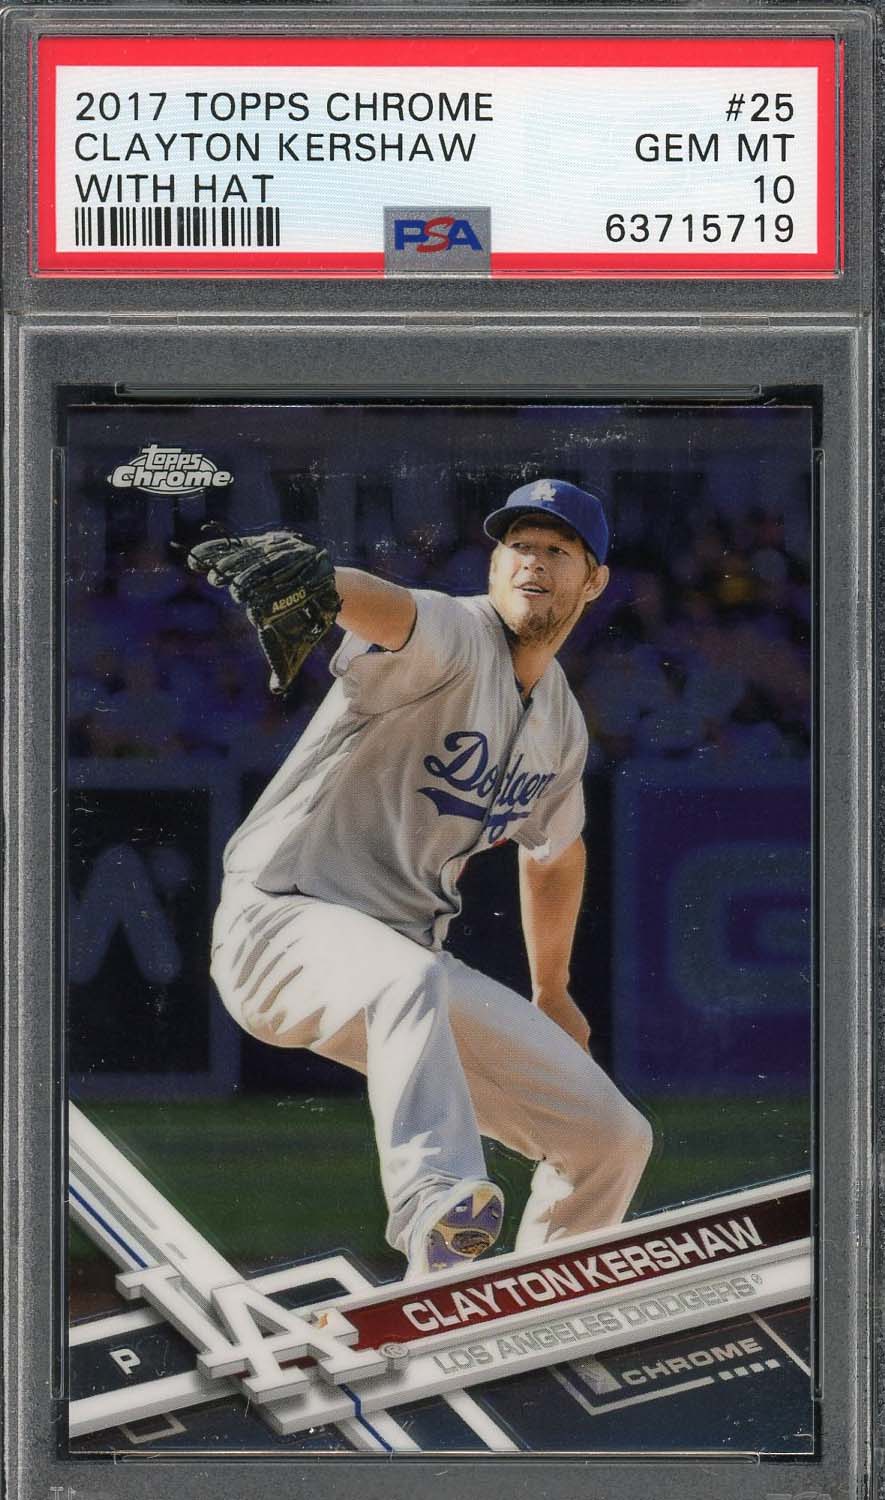 Clayton Kershaw 2017 Topps Chrome With Hat Baseball Card #25 Graded PS